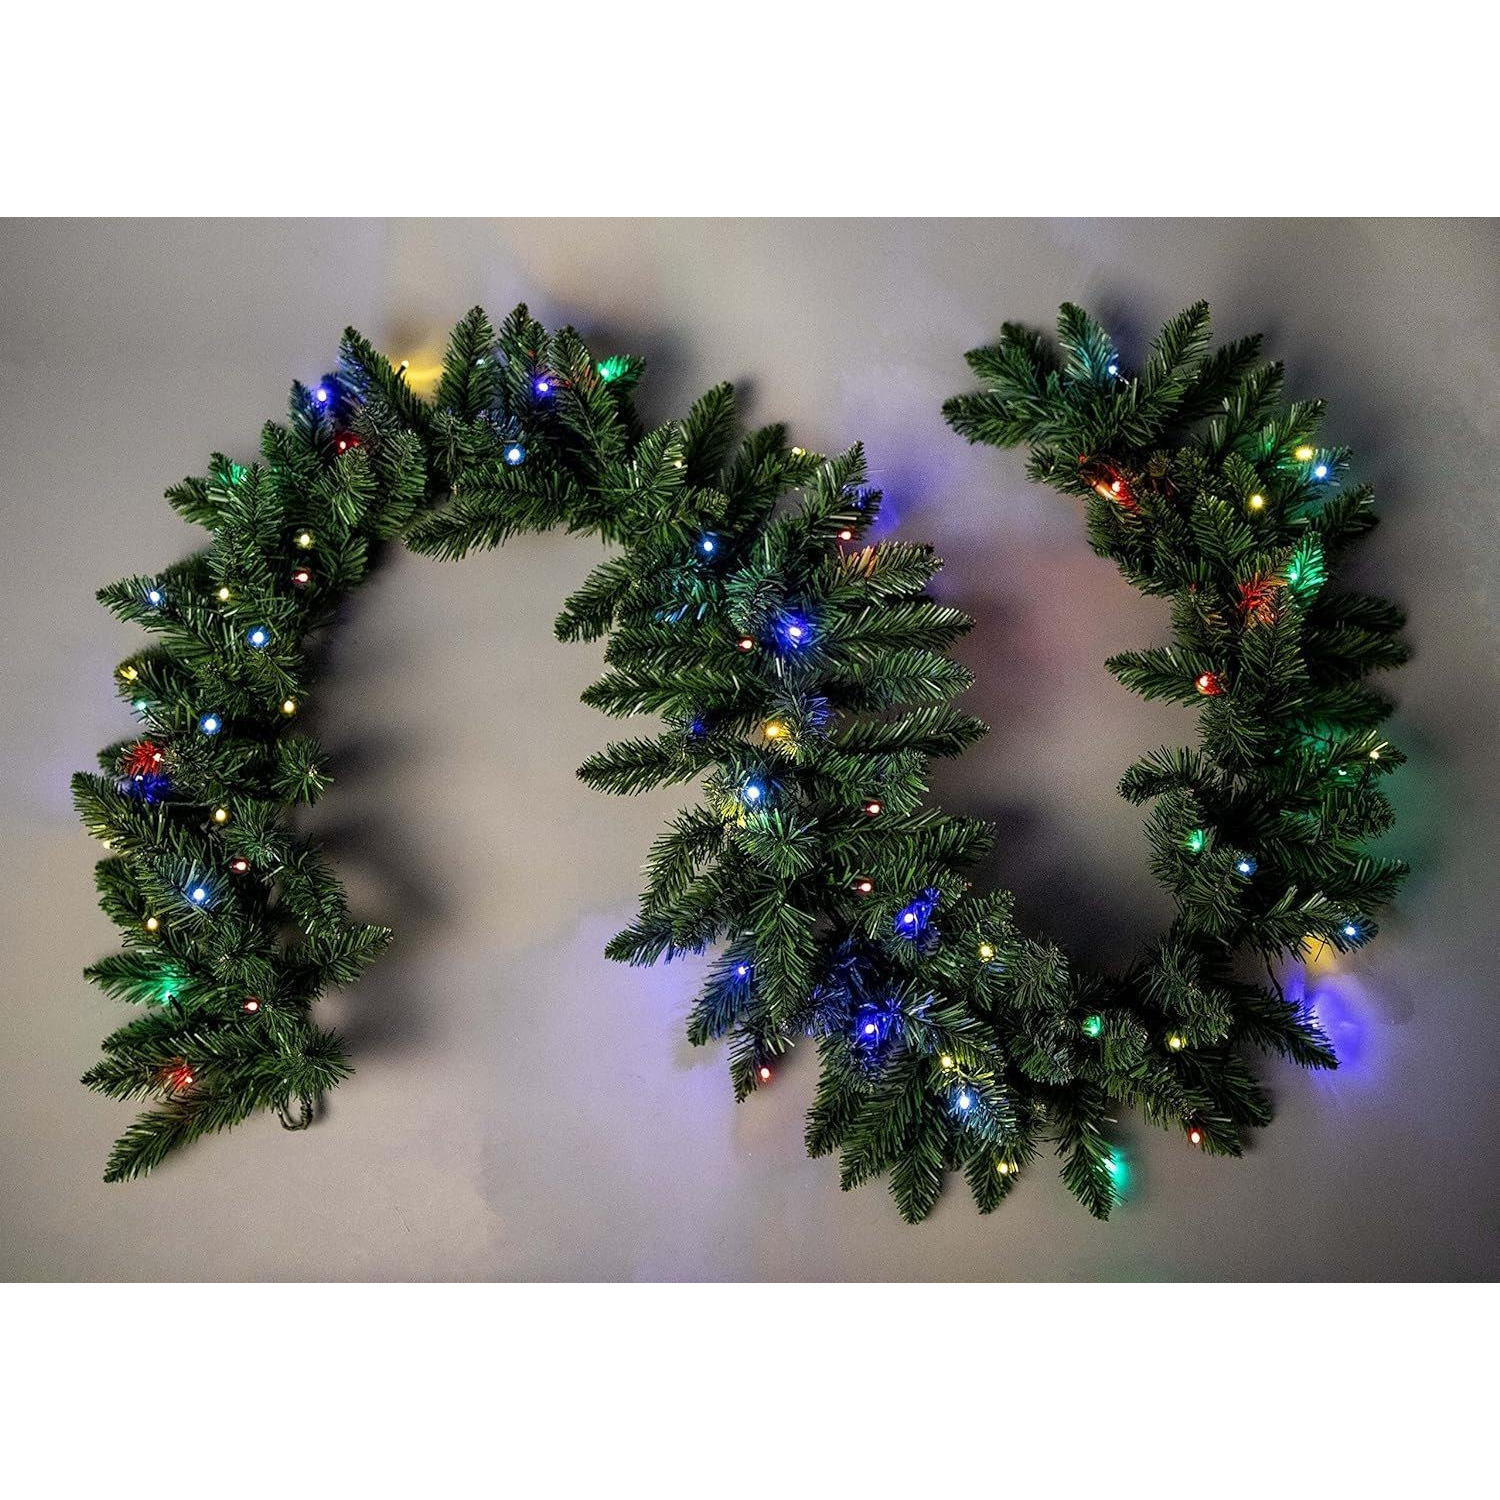 2m Prelit Imperial Pine Green W/Multicolour Leds Christmas Christmas Garland - image 1